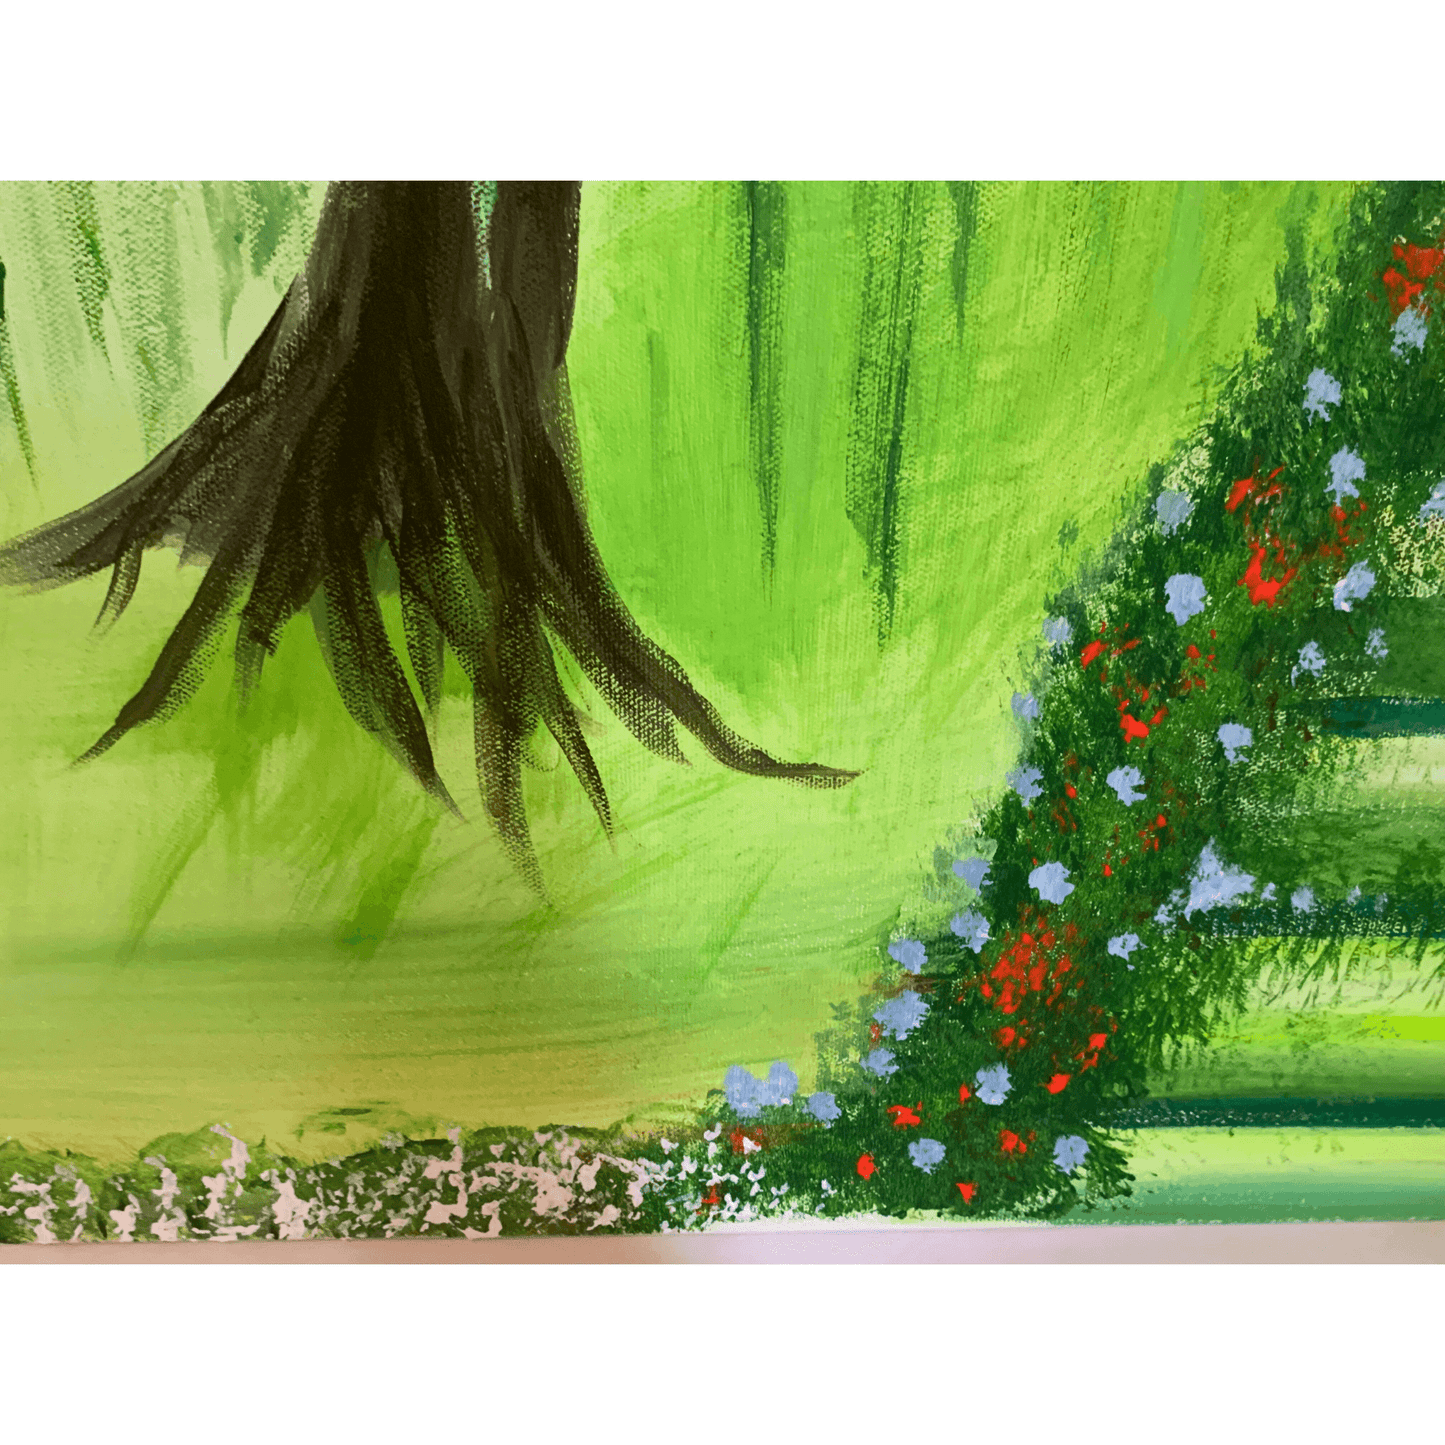 UNDER THE WILLOW TREE- Nature Art With Acrylics on 24x36 inch Canvas